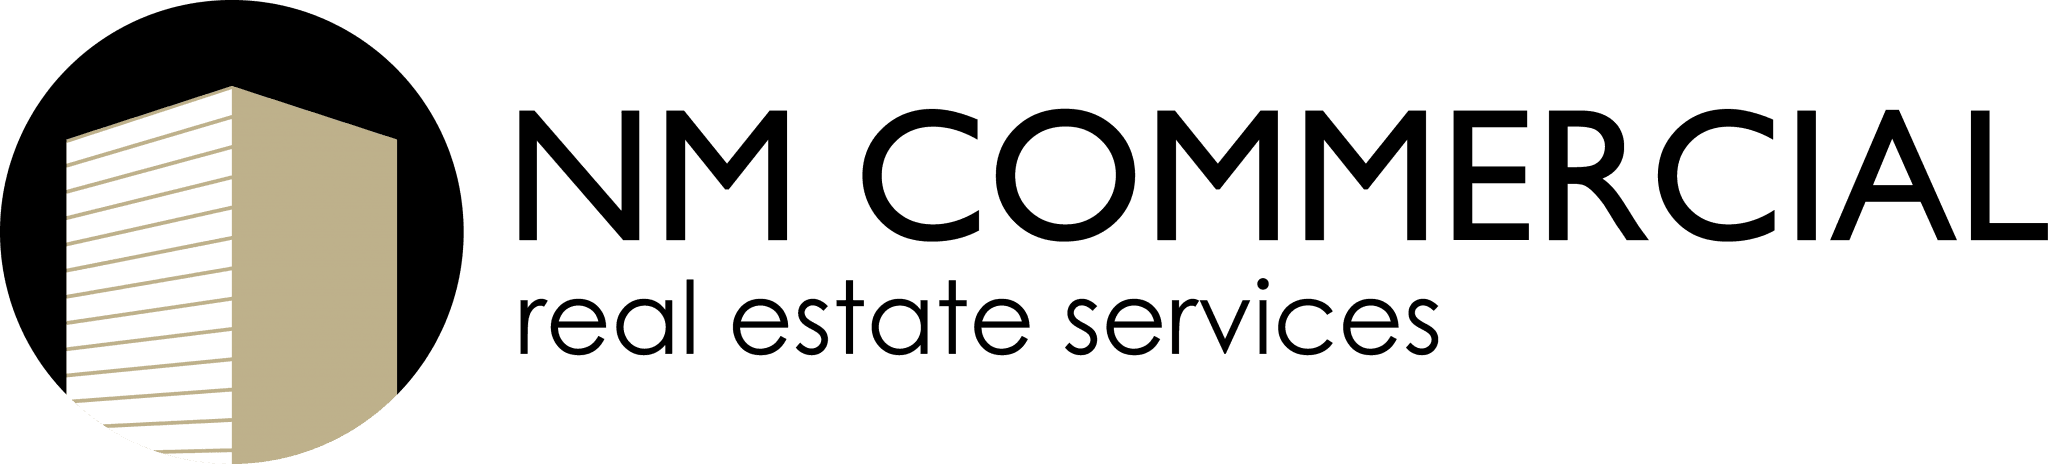 NM Commercial Real Estate Services